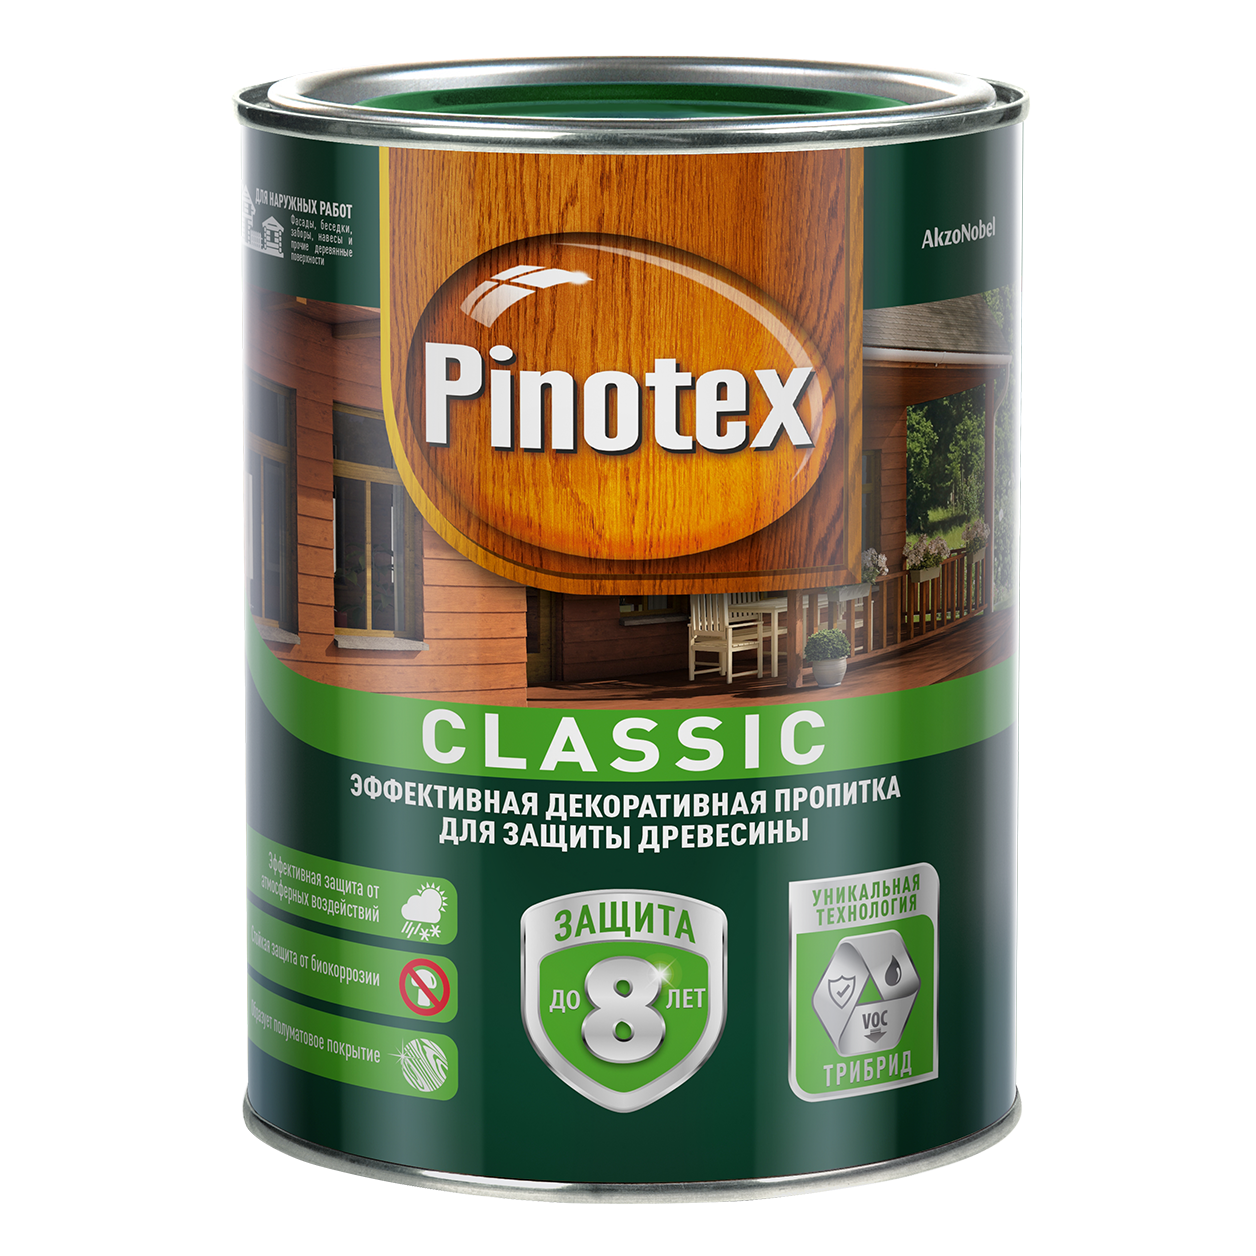 <span style="font-weight: bold;">Pinotex Classic(1л)</span>